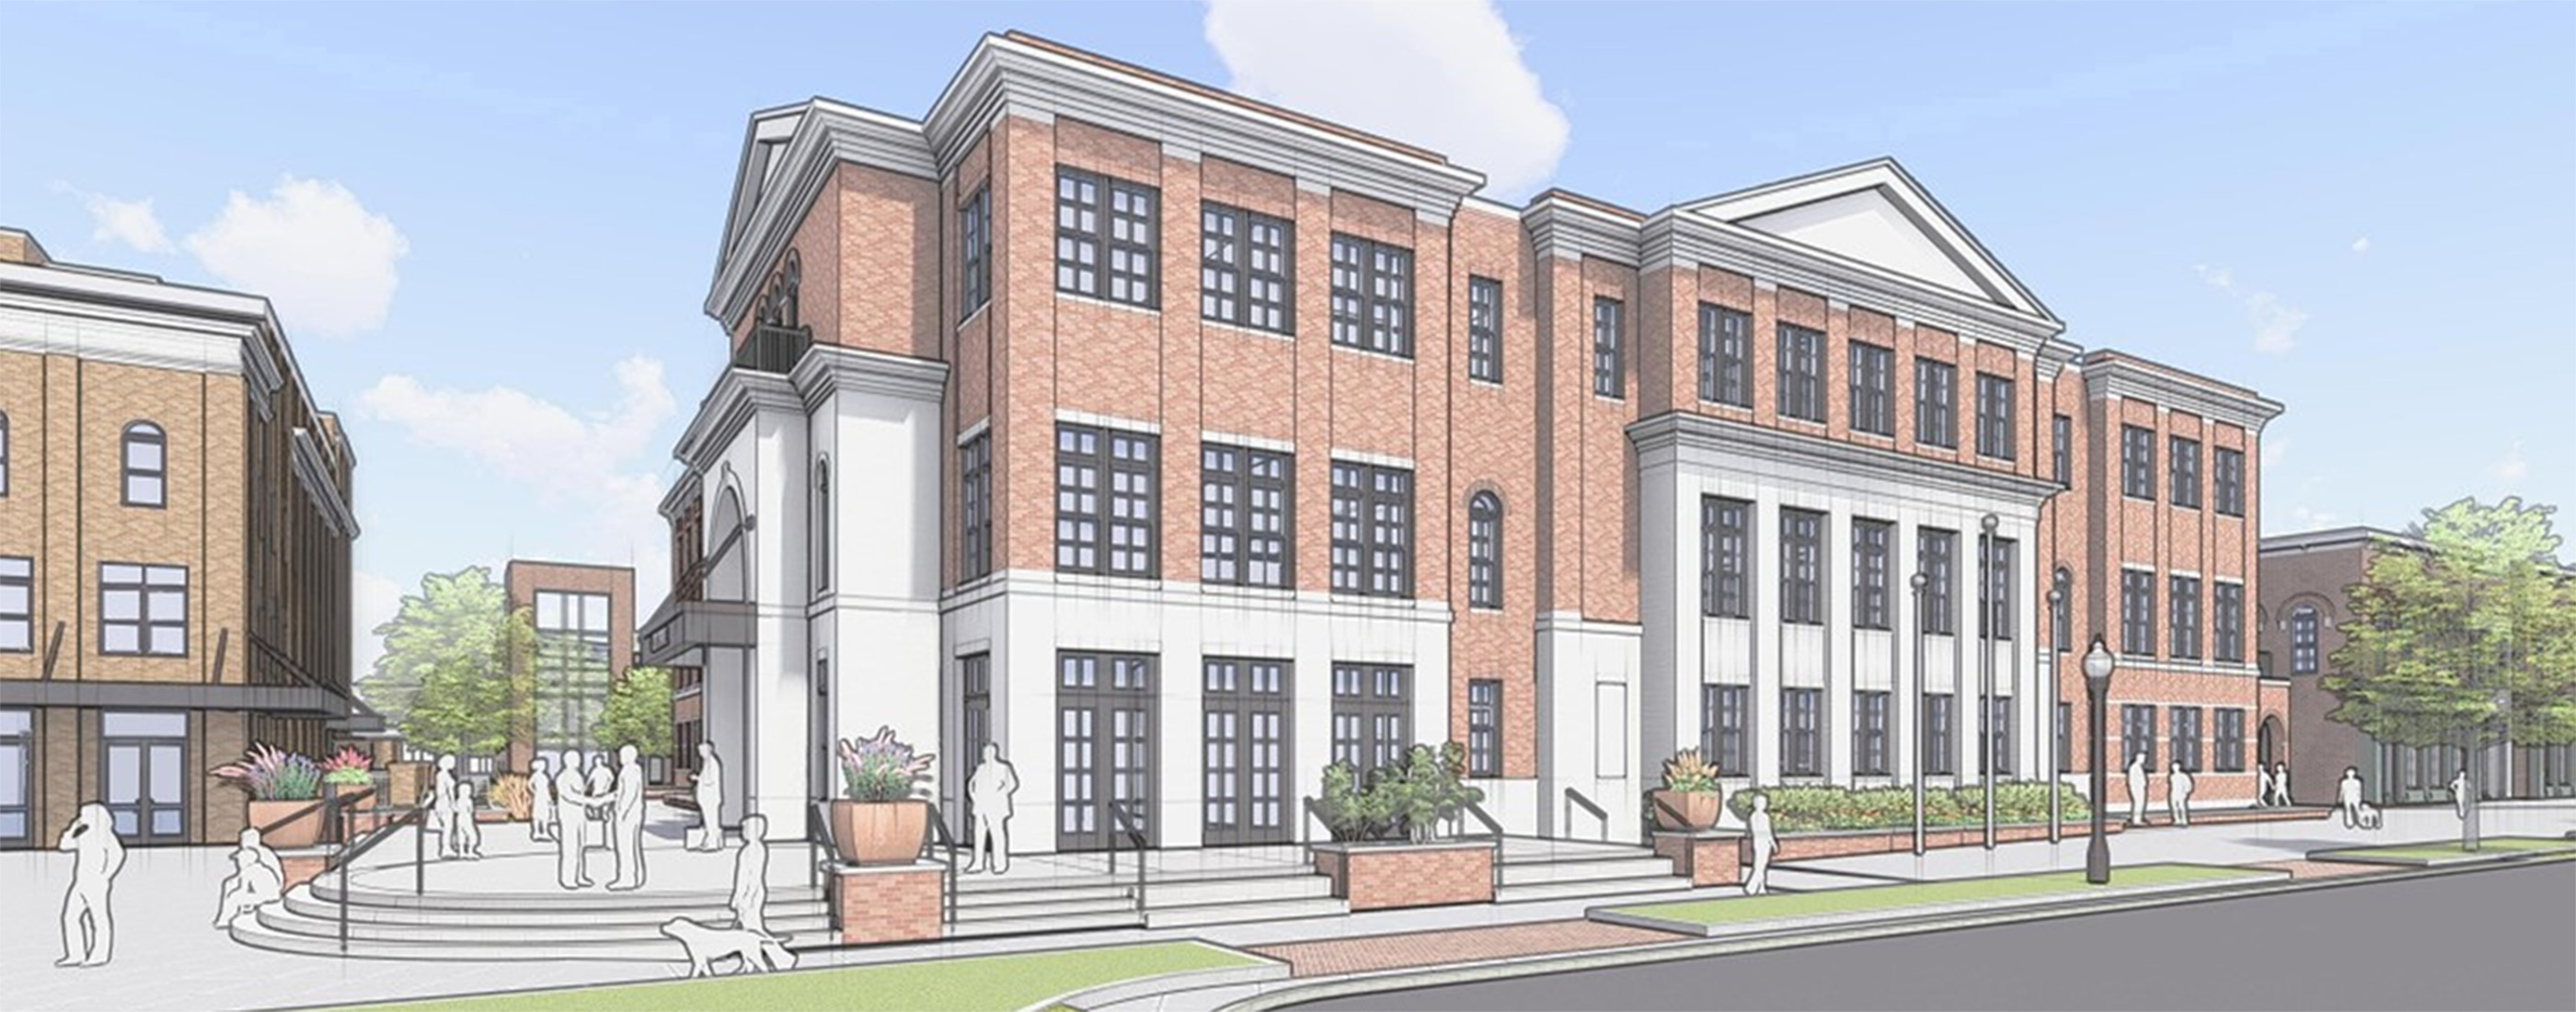 Rendering depicting the traditional style of the new city hall in Franklin, Tennessee.